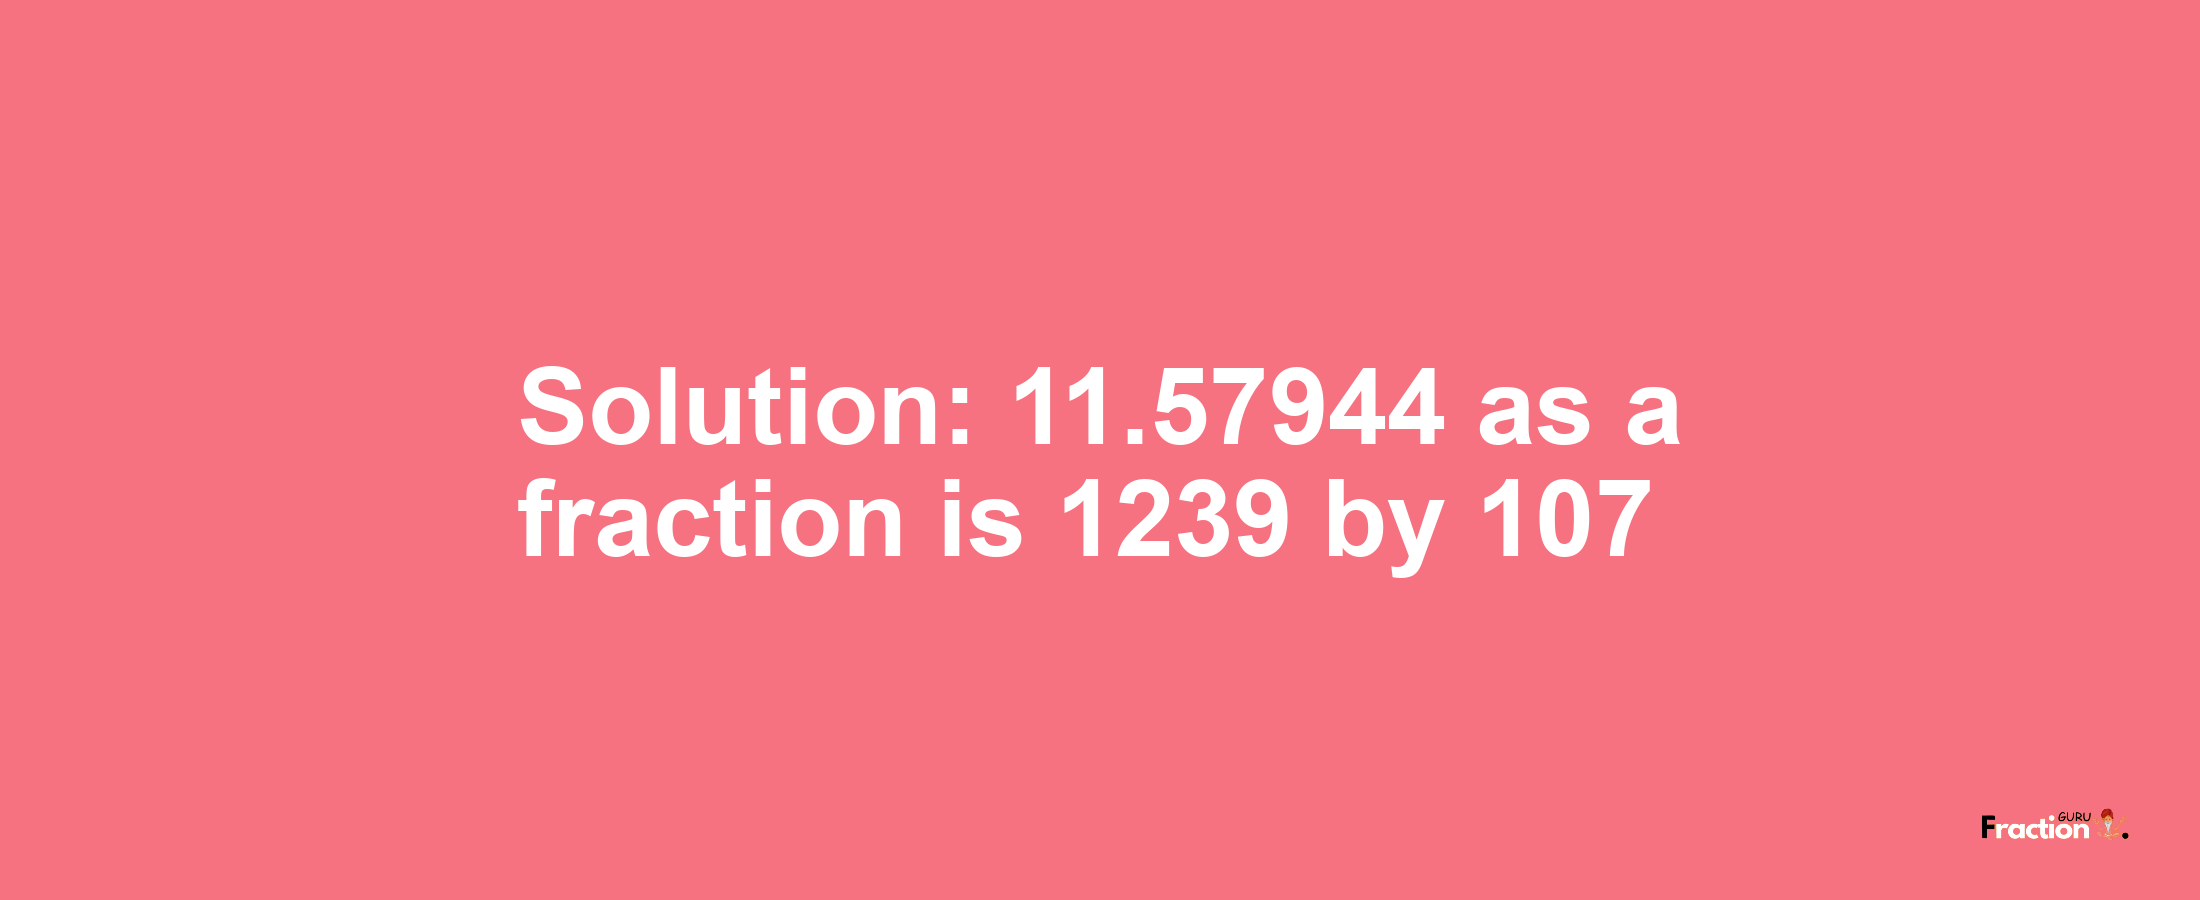 Solution:11.57944 as a fraction is 1239/107